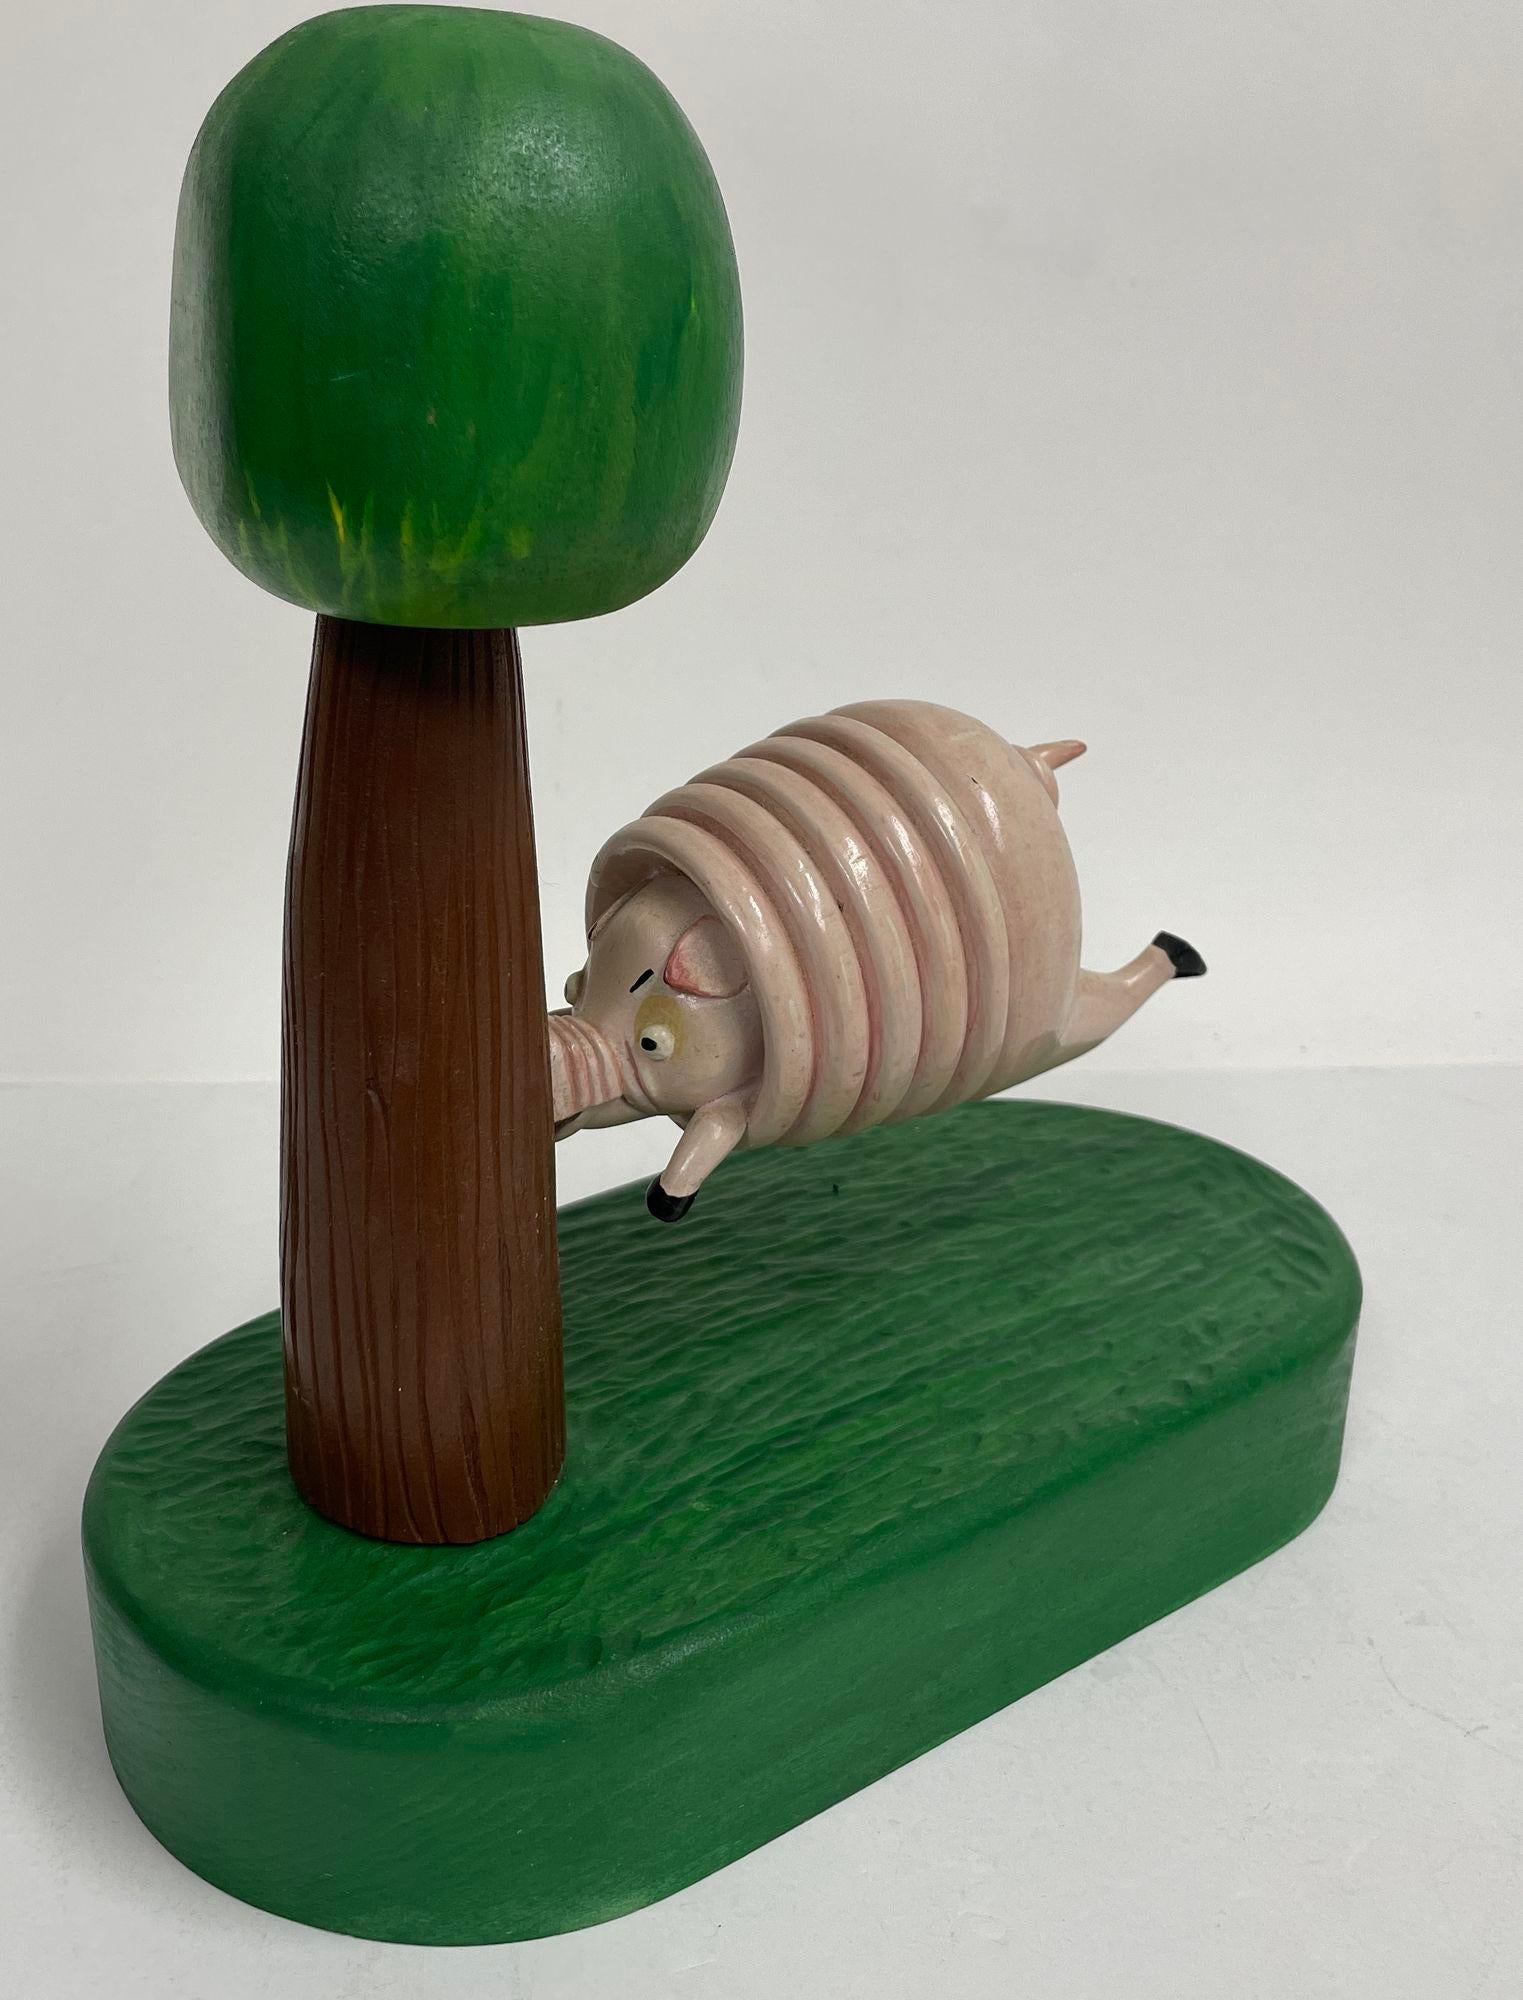 Hand-Crafted Vintage Folk Art Wood Sculpture of a Pig Running into a Tree by R. Harper 1991 For Sale